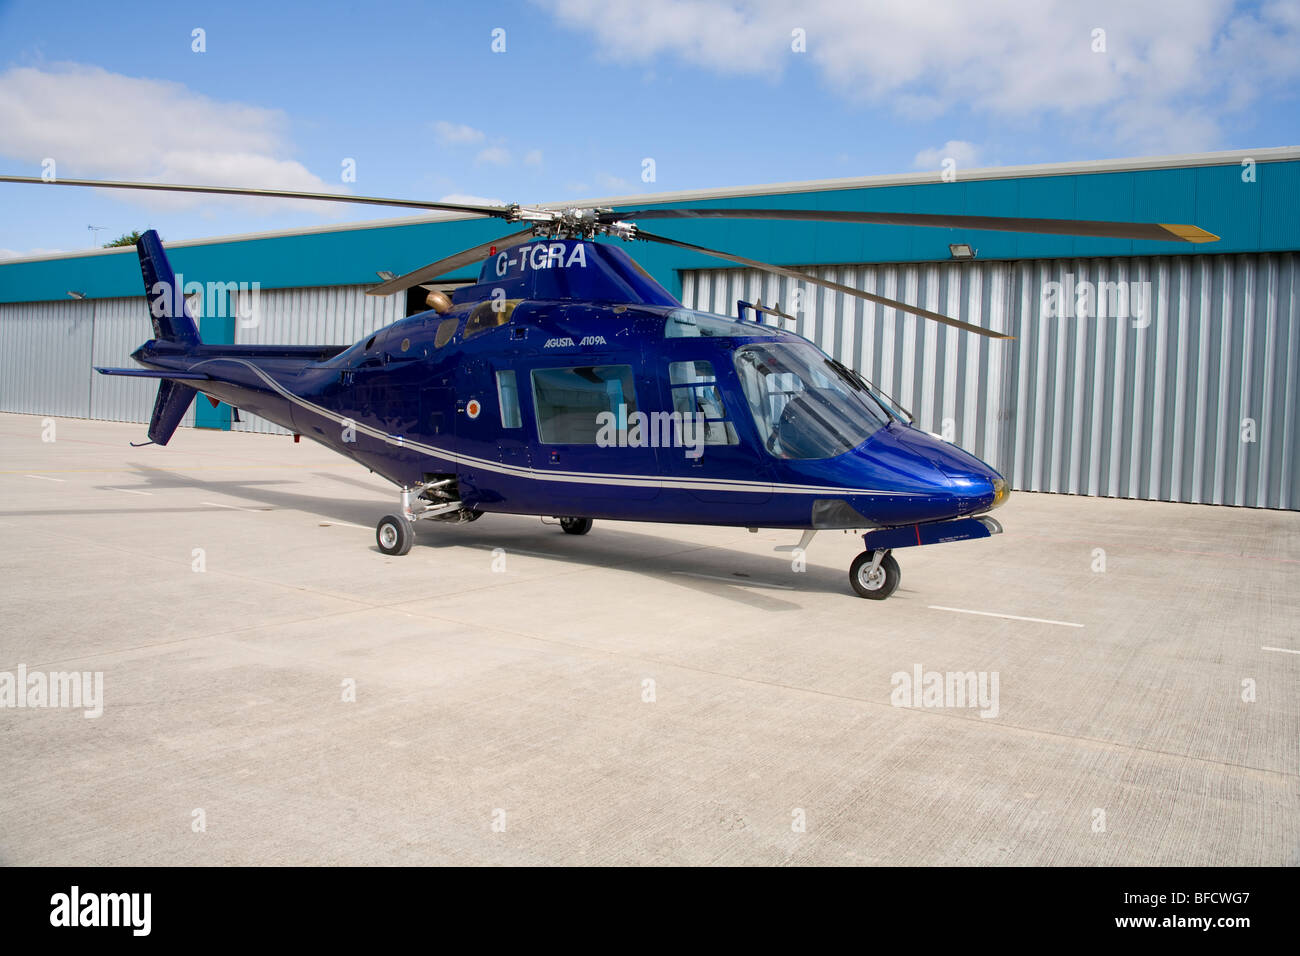 AgustaWestland A109A Private use helicopter. Stock Photo